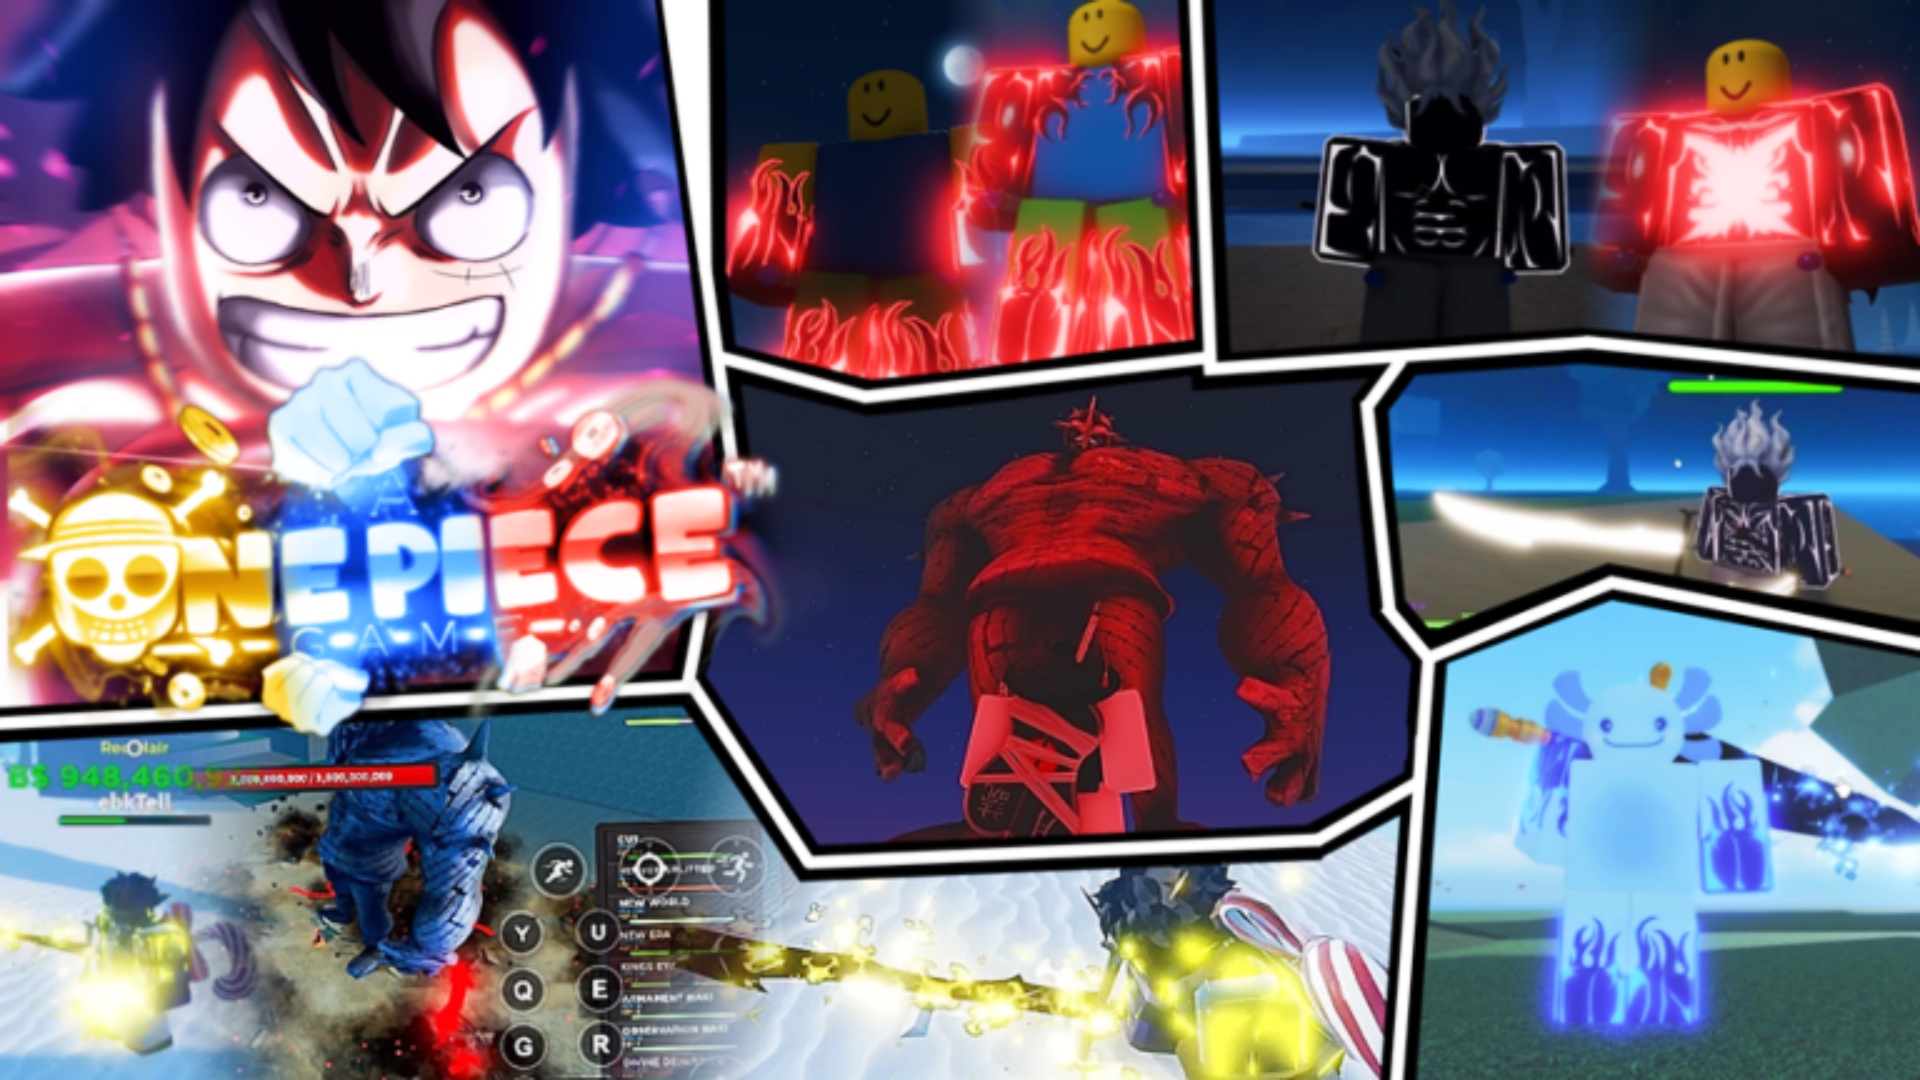 Top 15 NEW ONE PIECE Games Android iOS, One piece games Mobile